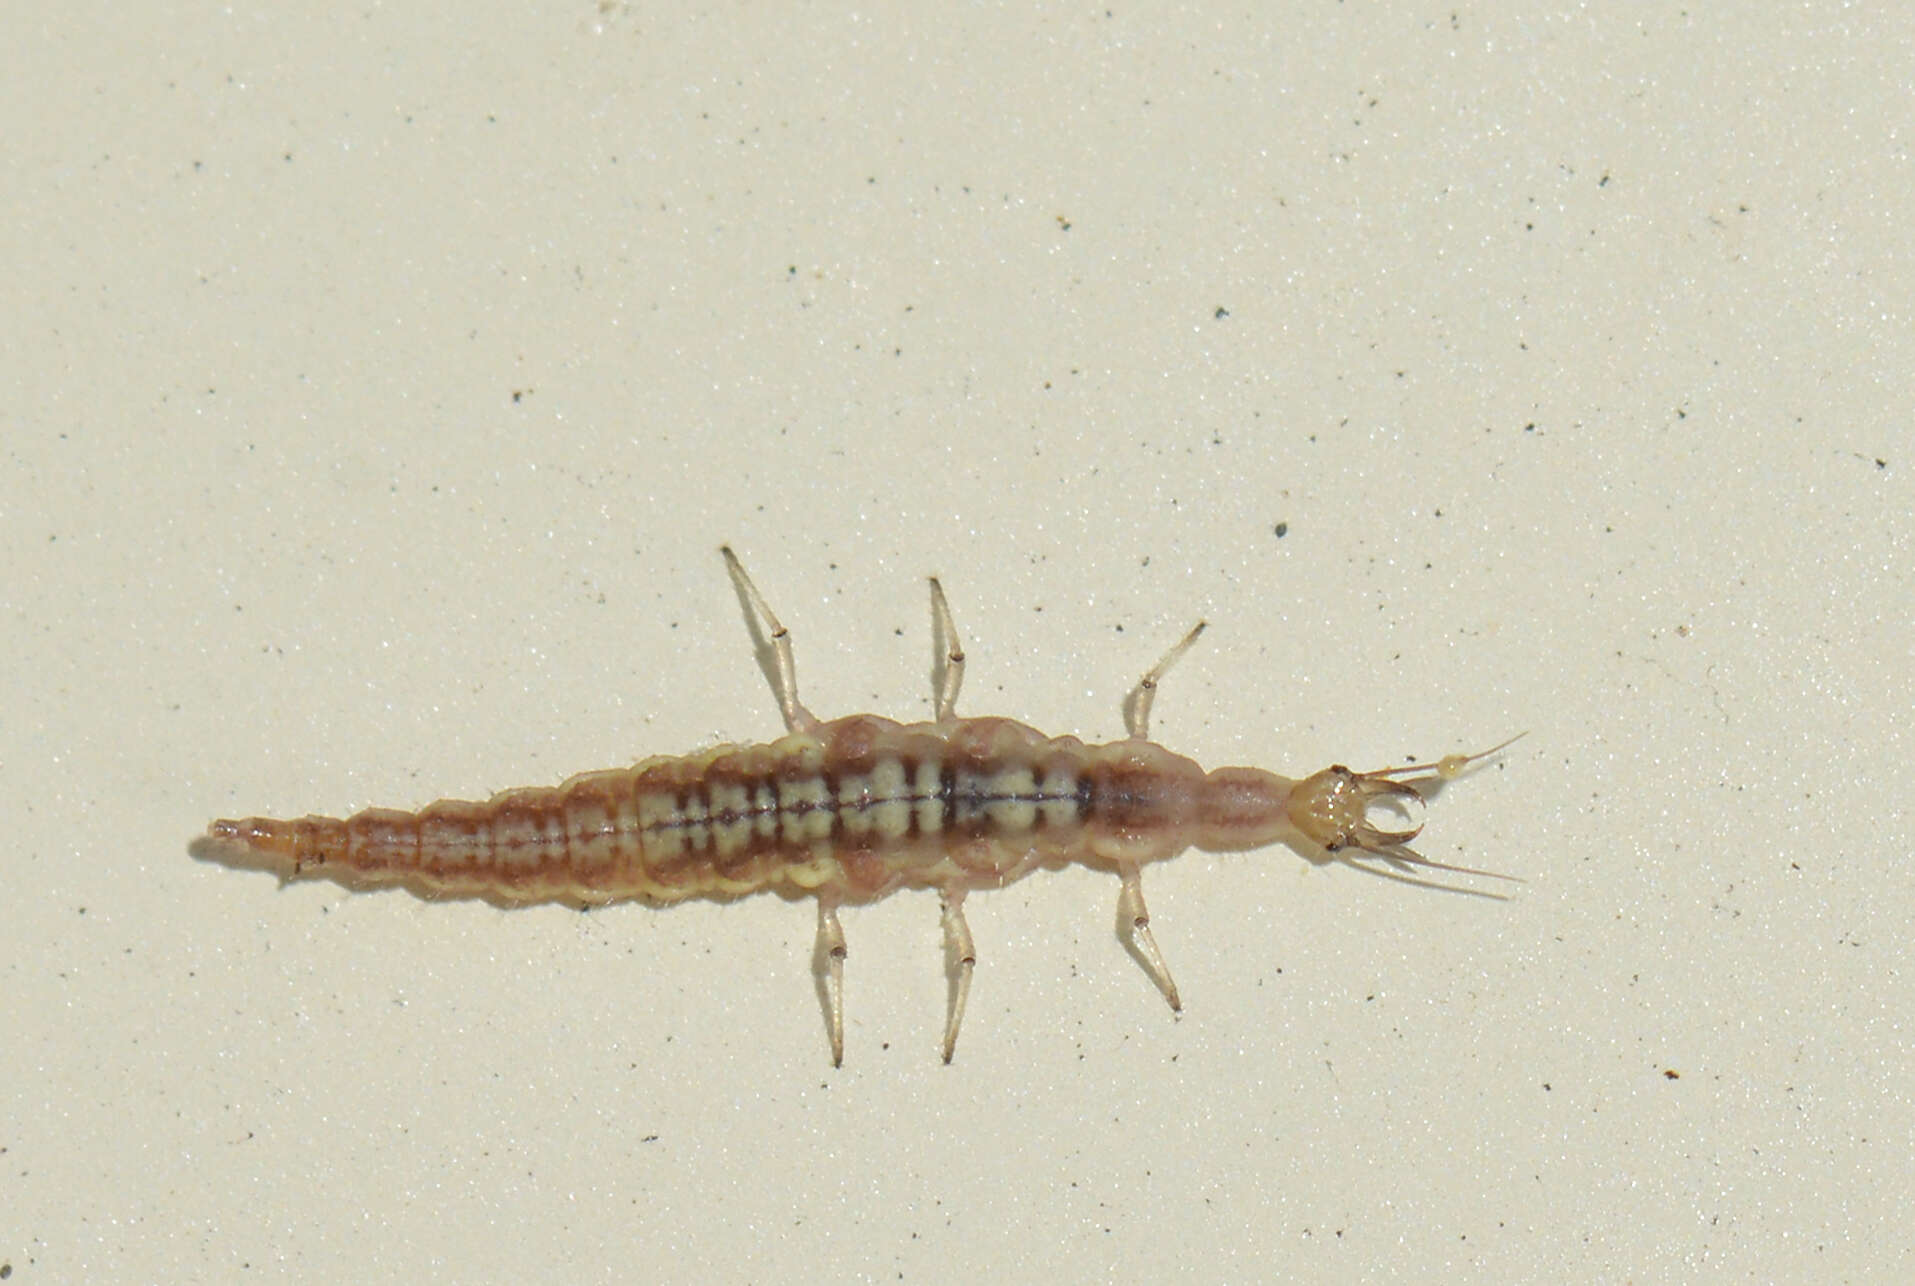 Image of brown lacewings